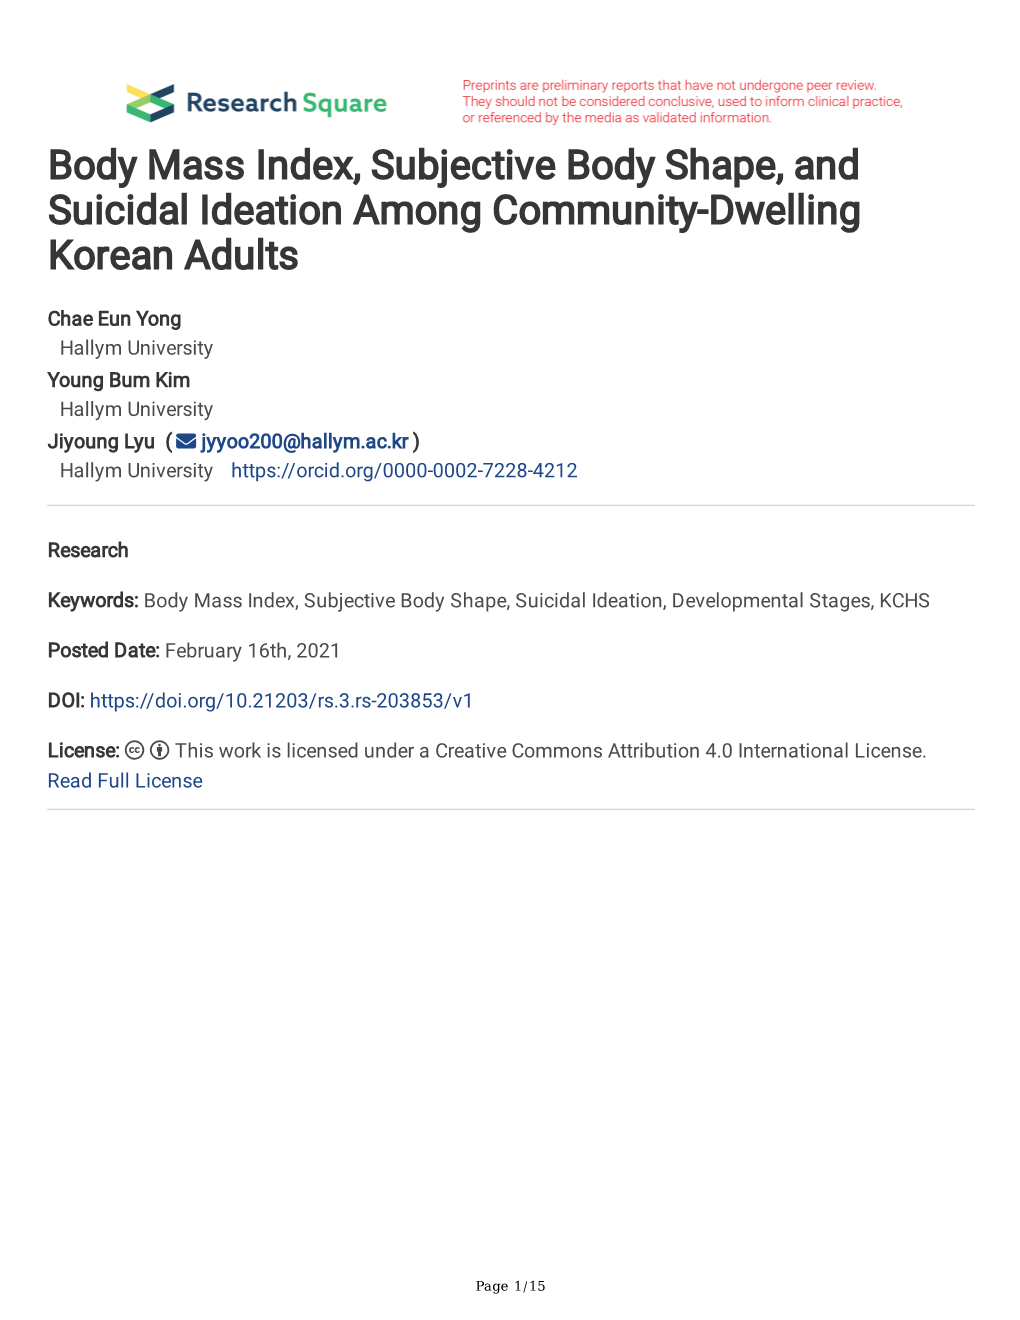 Body Mass Index, Subjective Body Shape, and Suicidal Ideation Among Community-Dwelling Korean Adults